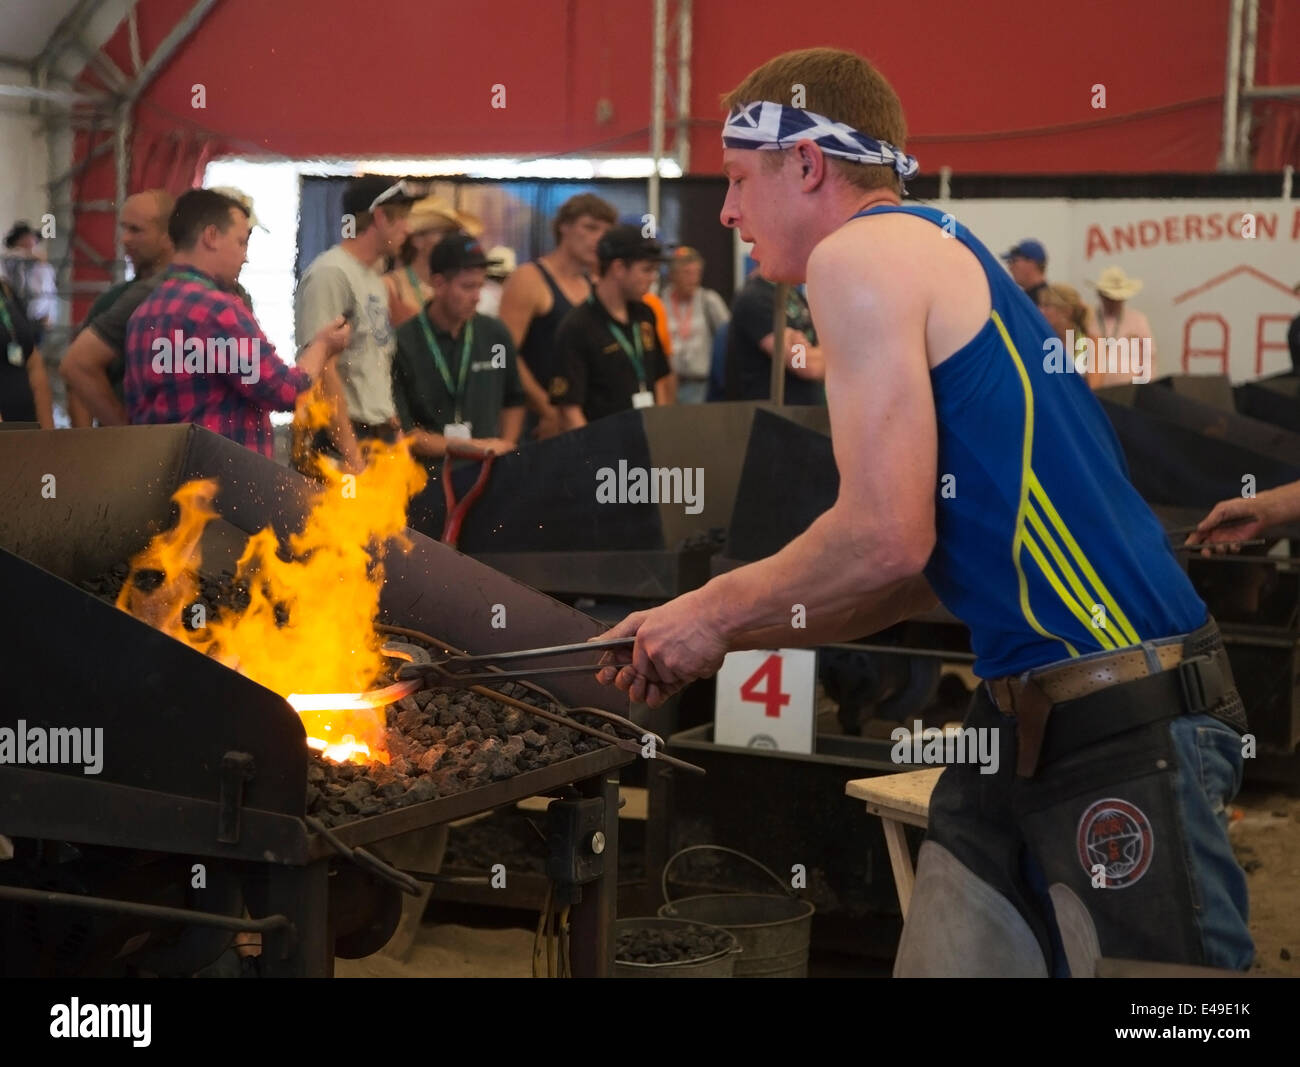 Calgary, Alberta, Canada. 06th July, 2014. Farrier forgeing horseshoe as he competes in the final round of the World Championships Blacksmiths' competition at the Calgary Stampede on Sunday, July 6, 2014. The top five farriers are competing for the title of world champion in this longstanding tradition at the Stampede. Calgary, Alberta, Canada. Credit:  Rosanne Tackaberry/Alamy Live News Stock Photo